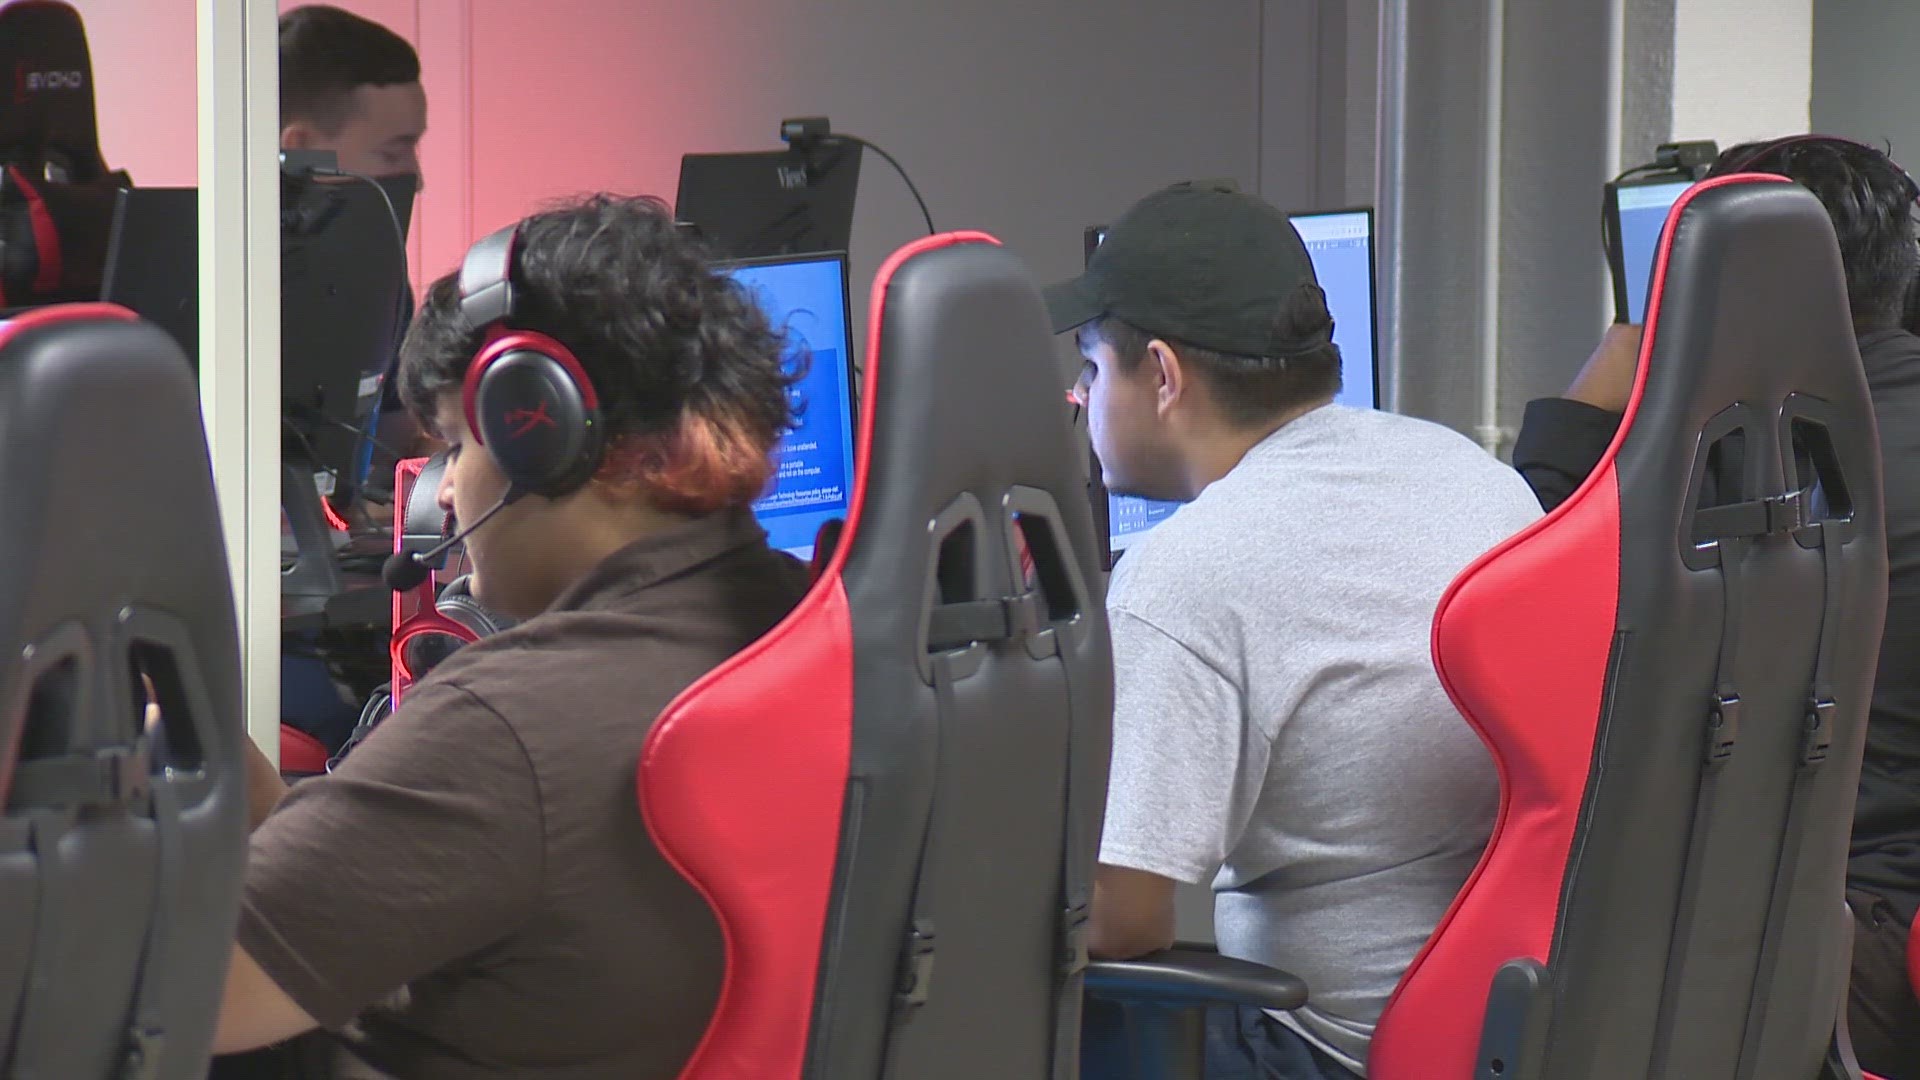 San Antonio College is opening its first e-sports arena.